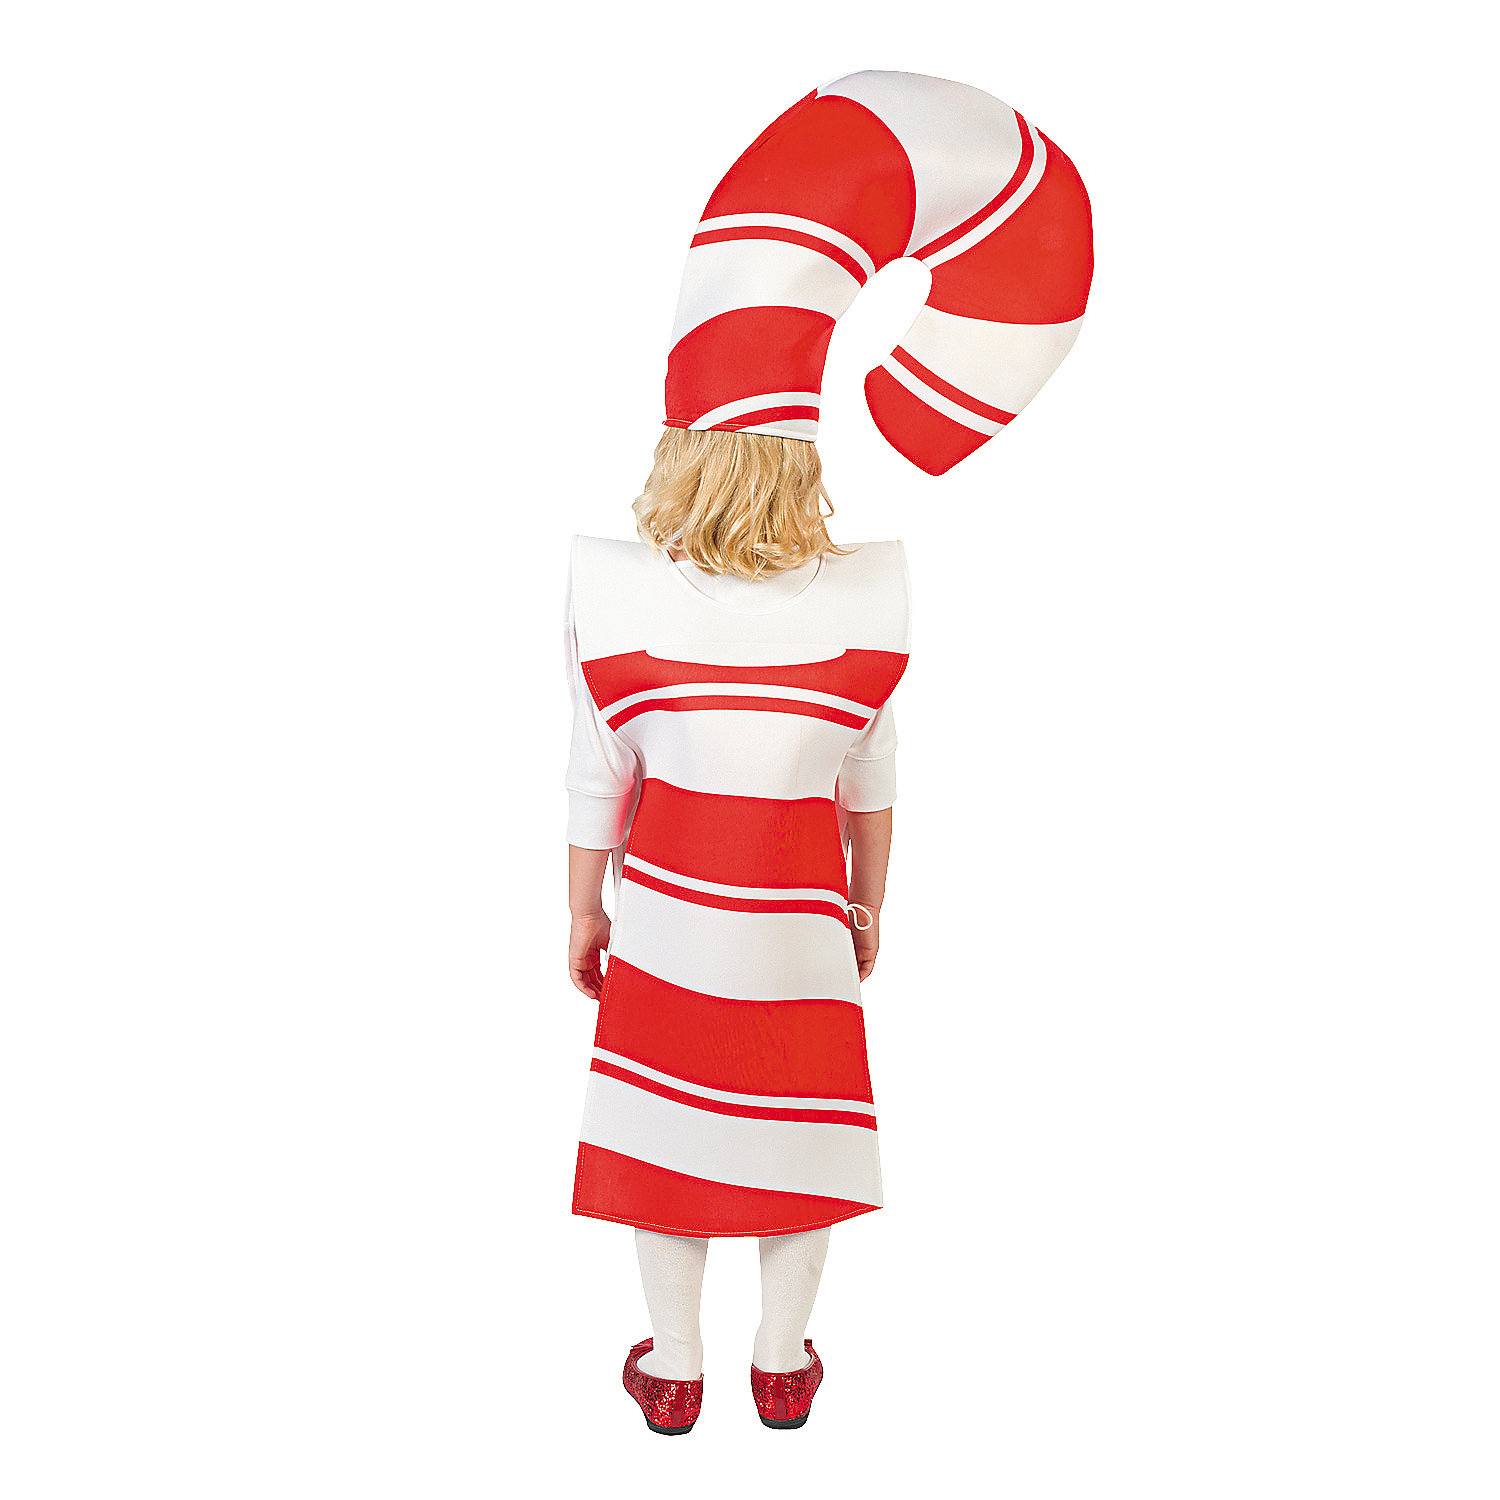 Candy Cane Costume - Oriental Trading